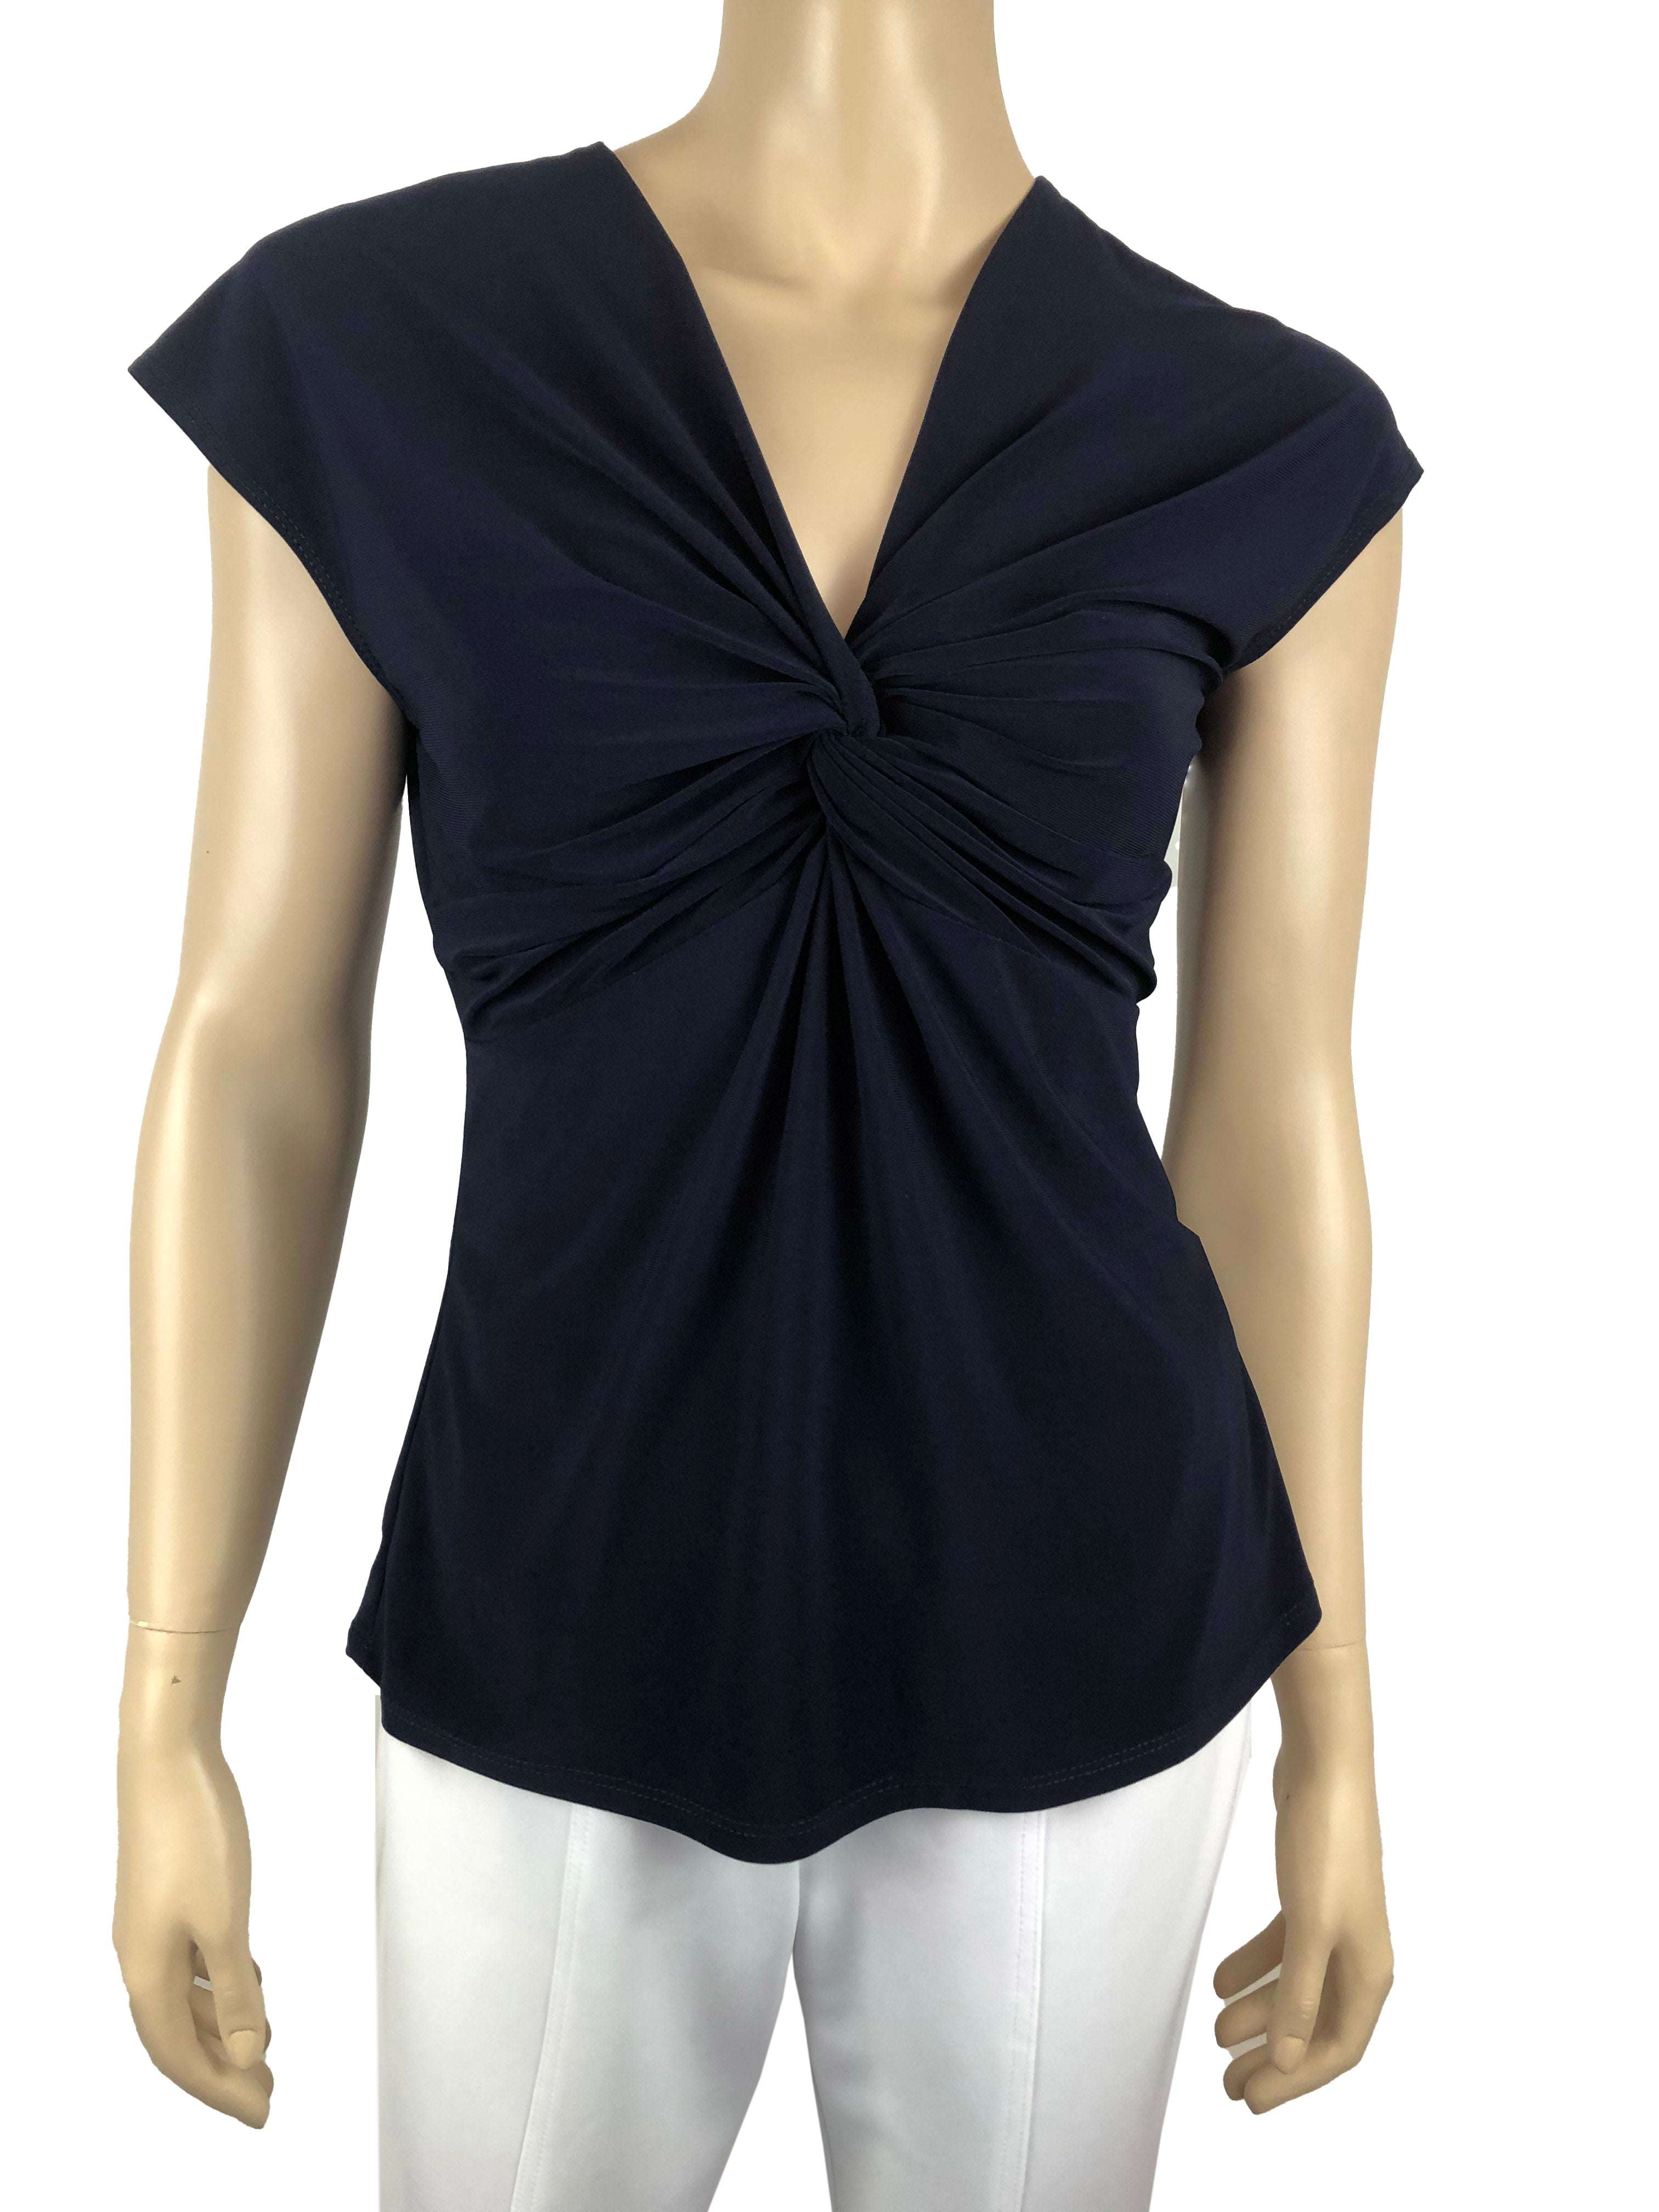 Women's Top Navy Cami Top Flattering Twist Front Design Quality Made i –  Yvonne Marie